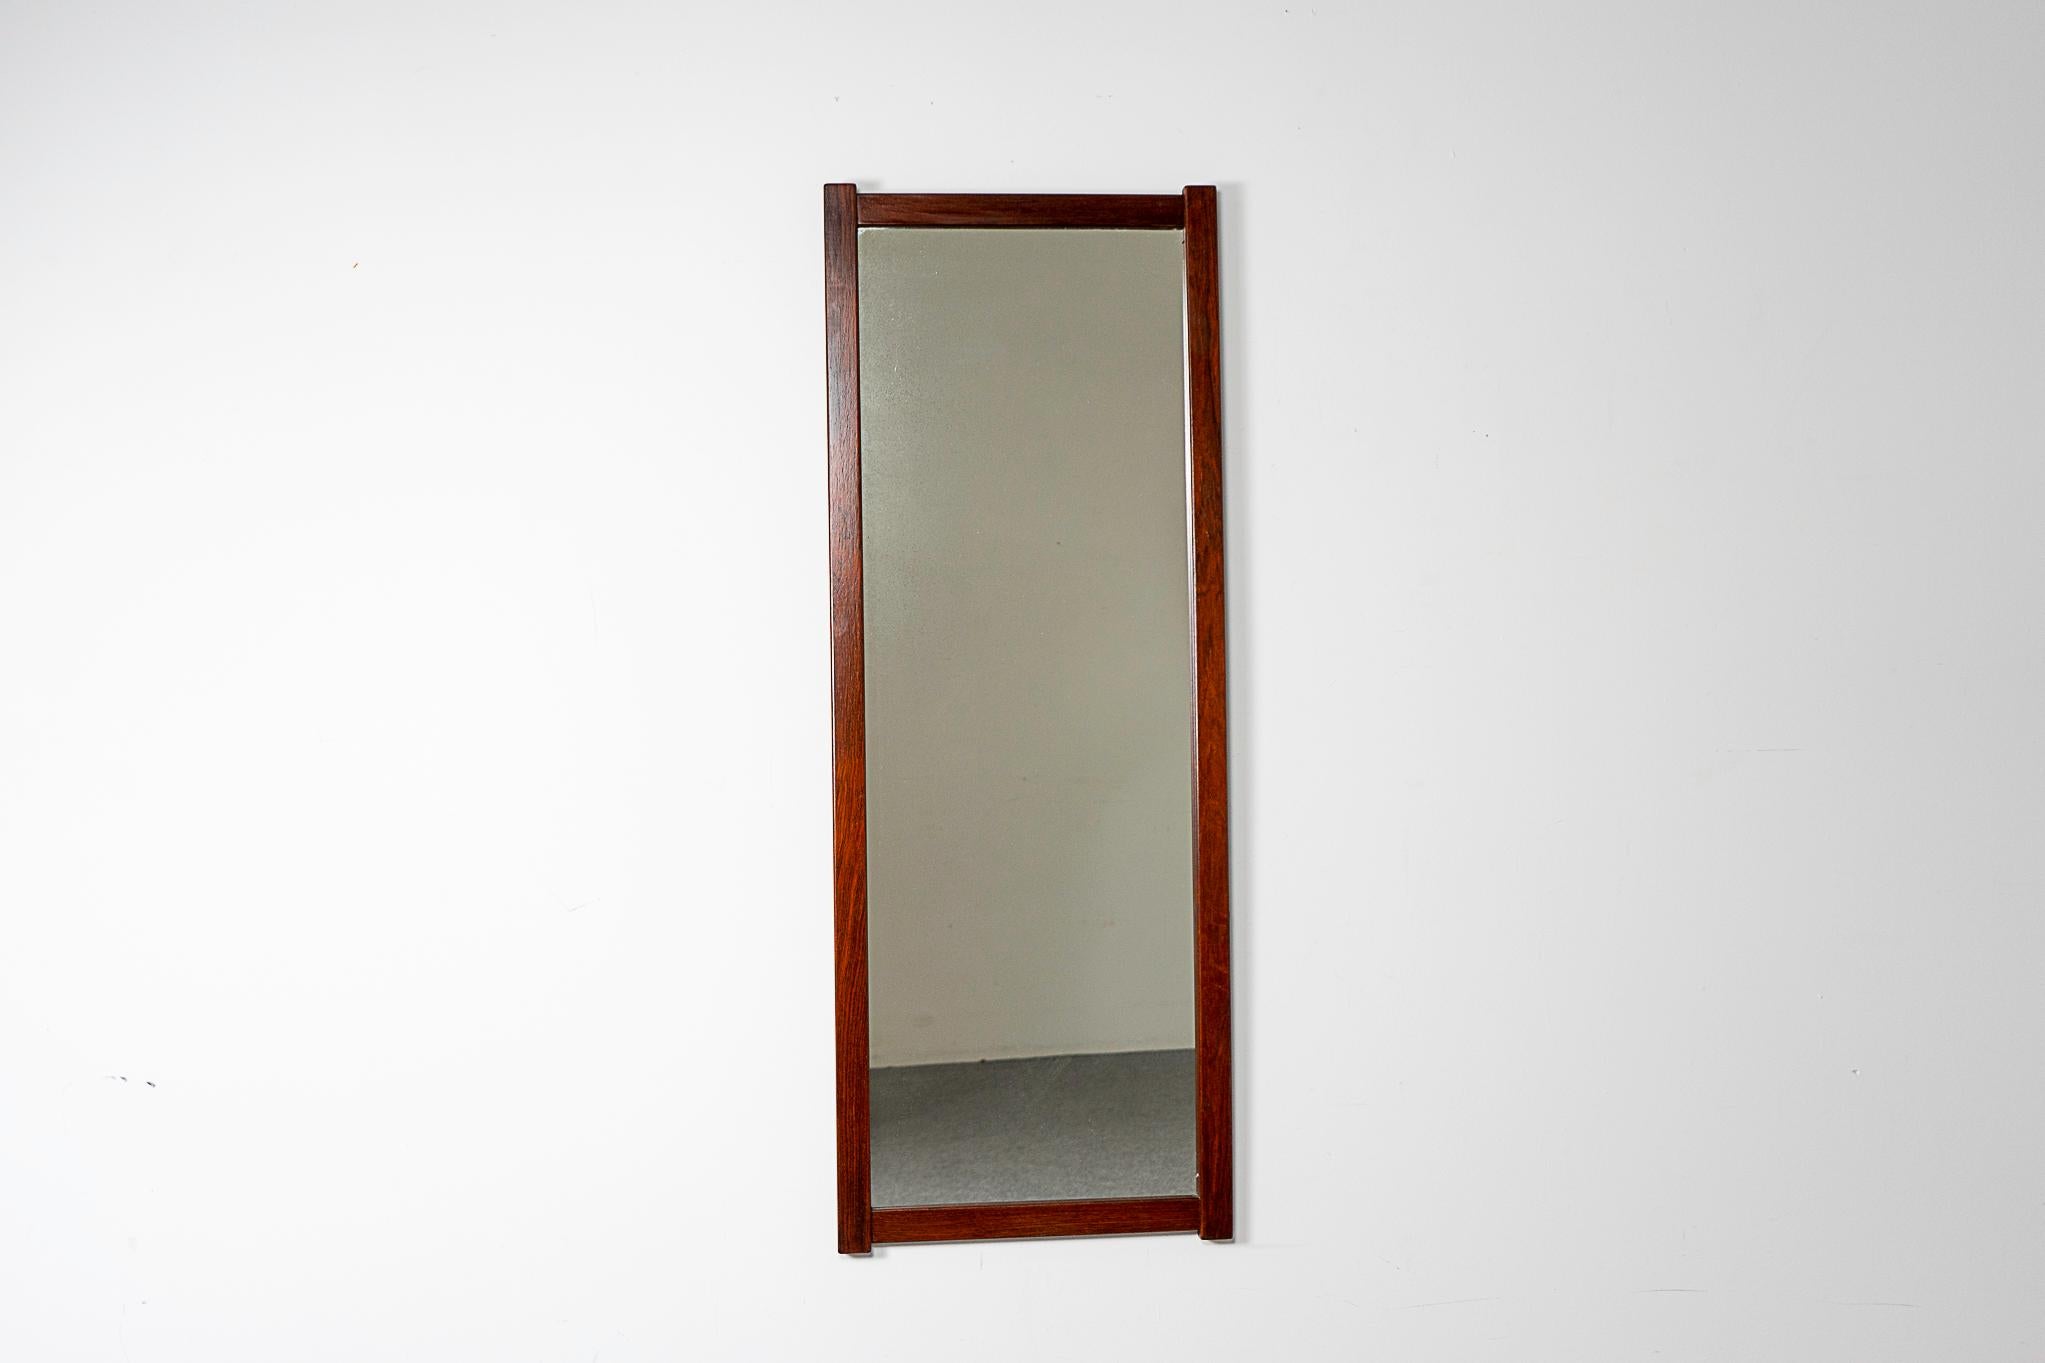 Rosewood mid-century mirror, circa 1960's. Slim design is perfect for hanging near the door to check yourself before heading out!